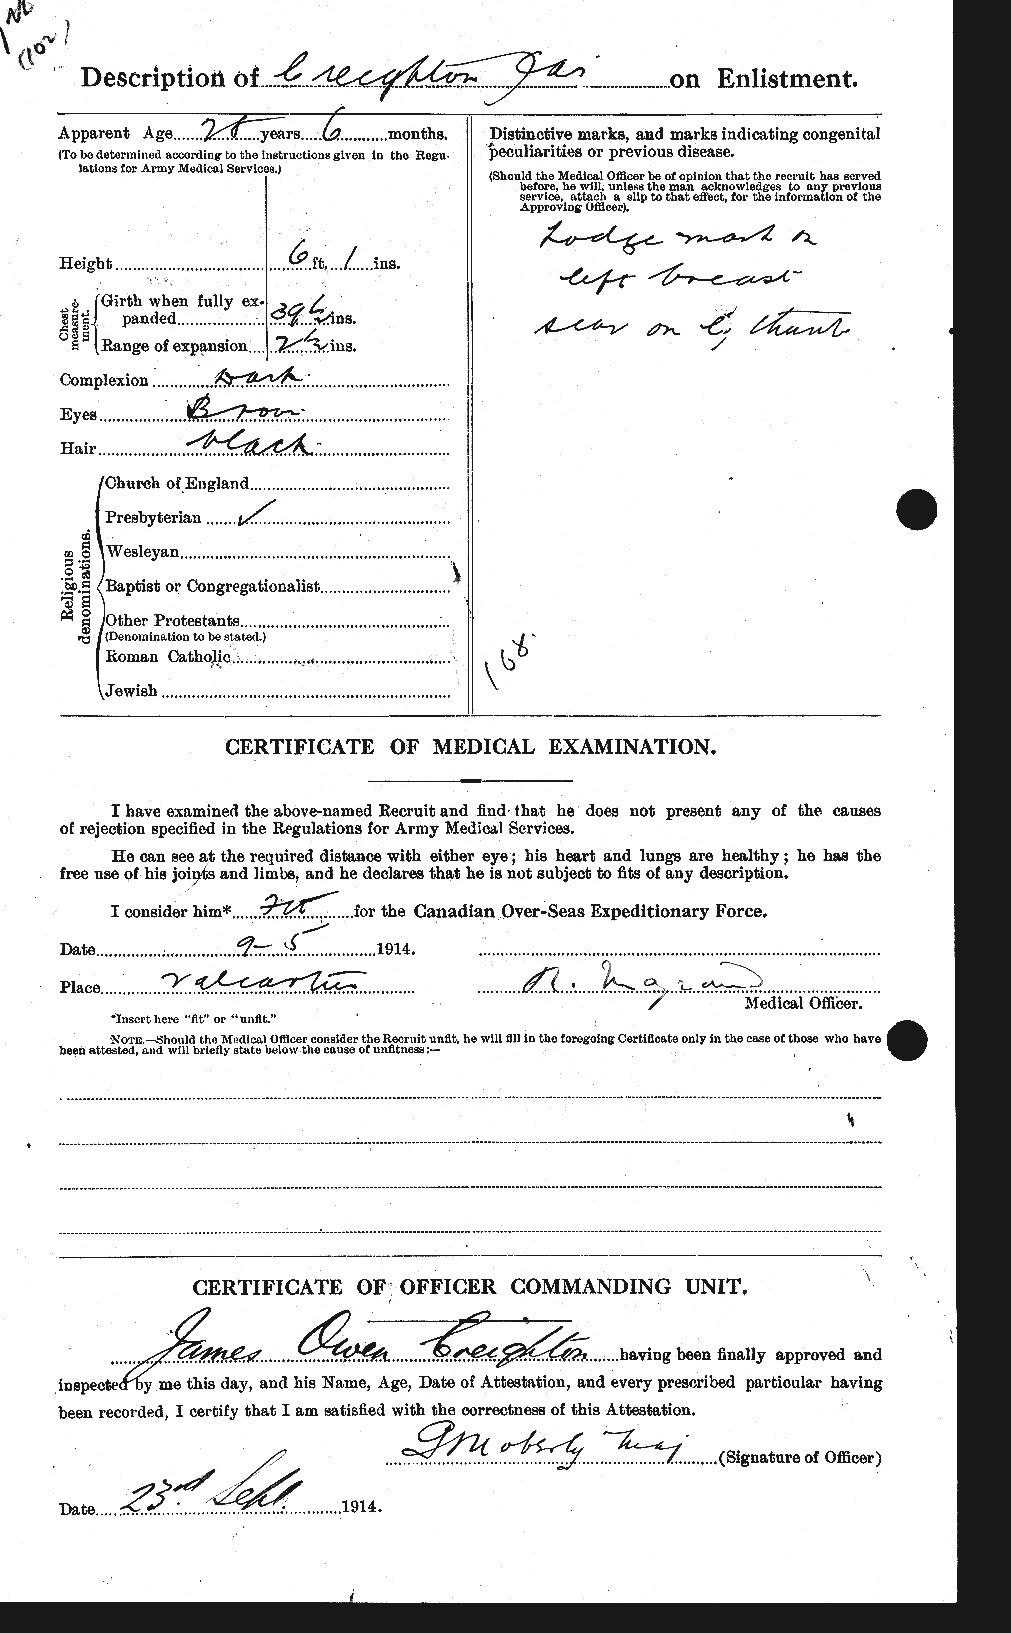 Personnel Records of the First World War - CEF 063070b